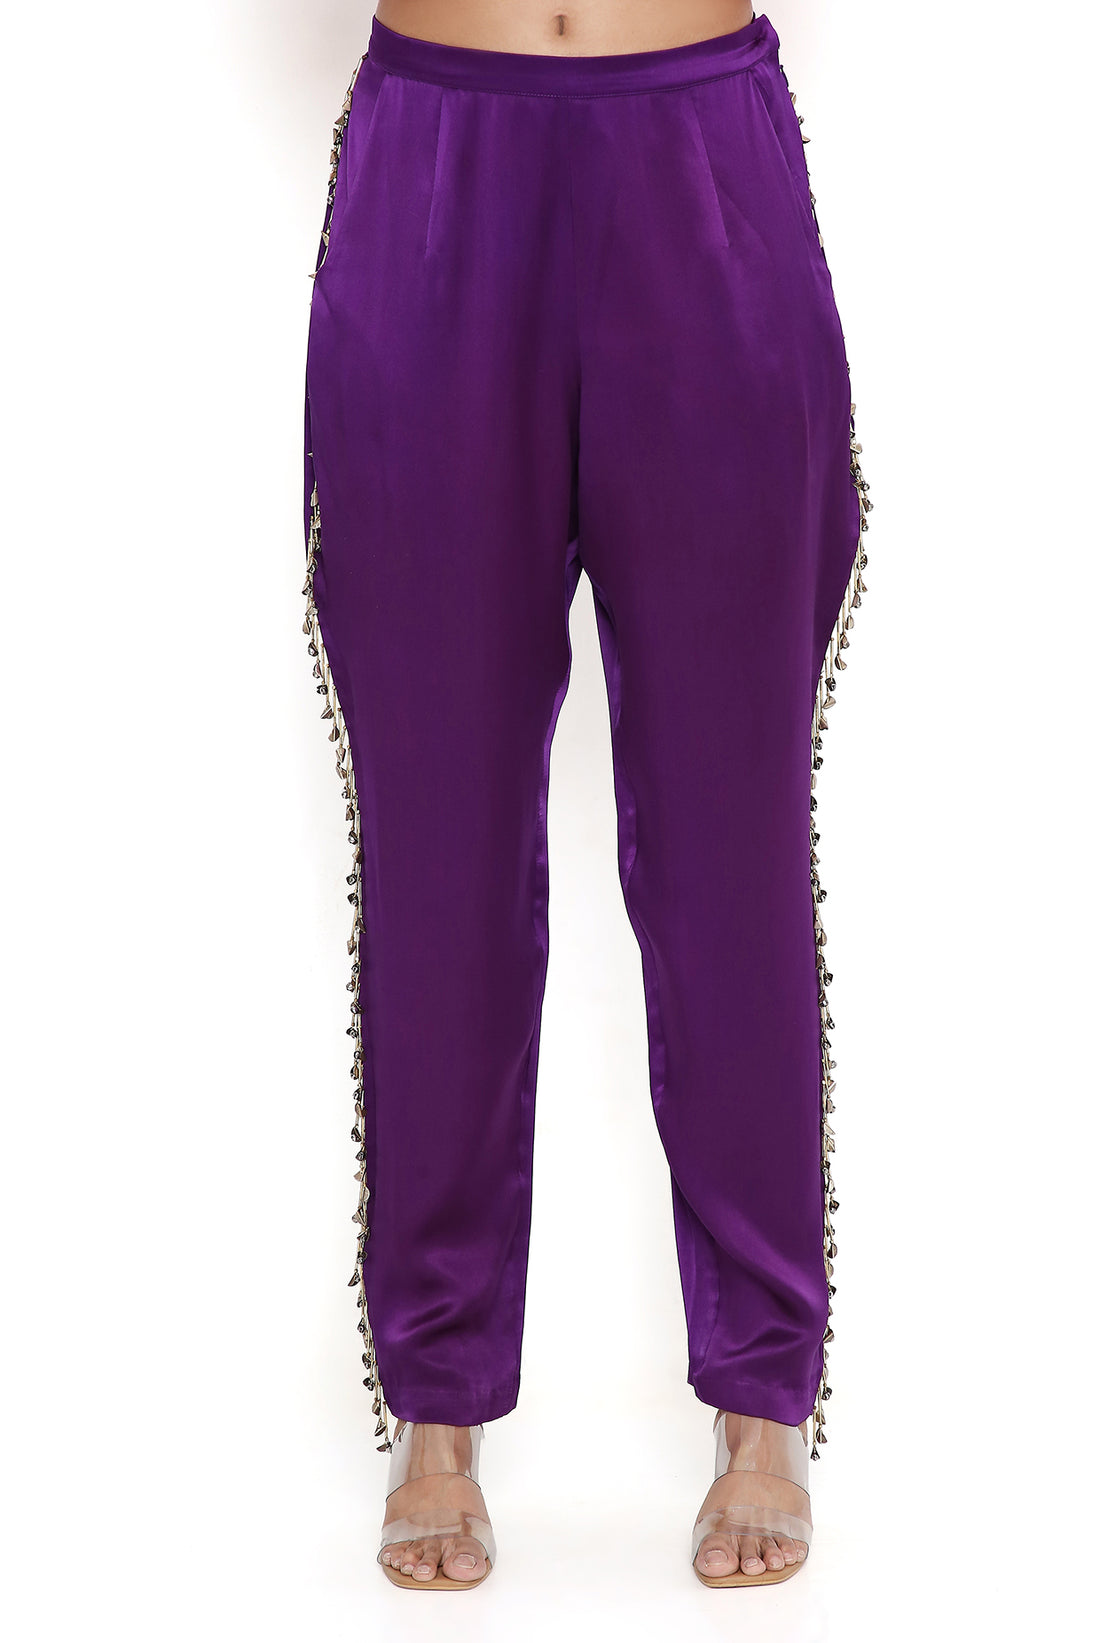 Pink Embroidered Top With Purple Pant